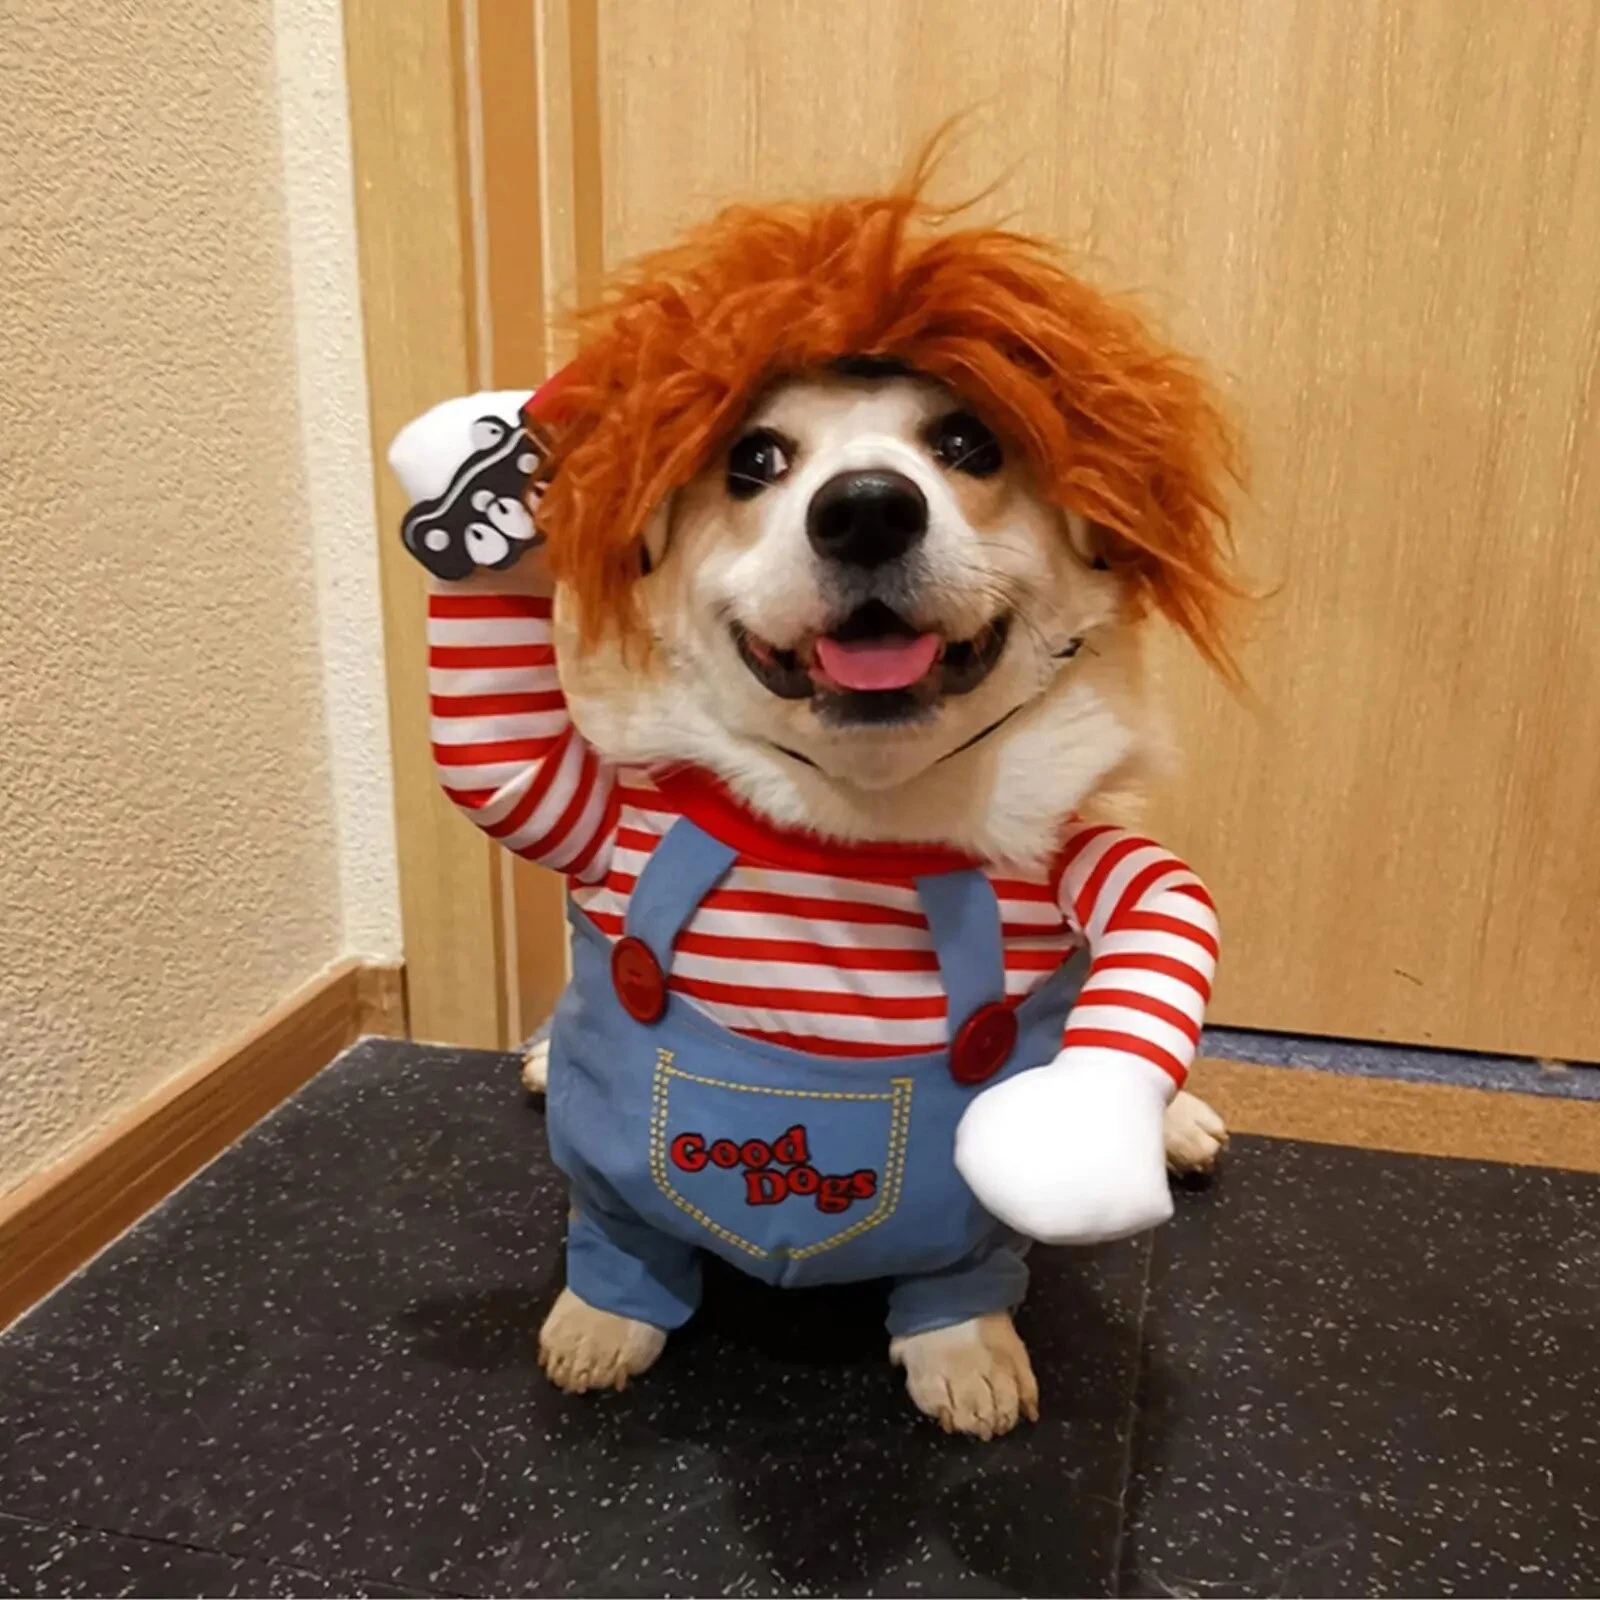 The Most Wholesome Chucky I’ve Ever Seen